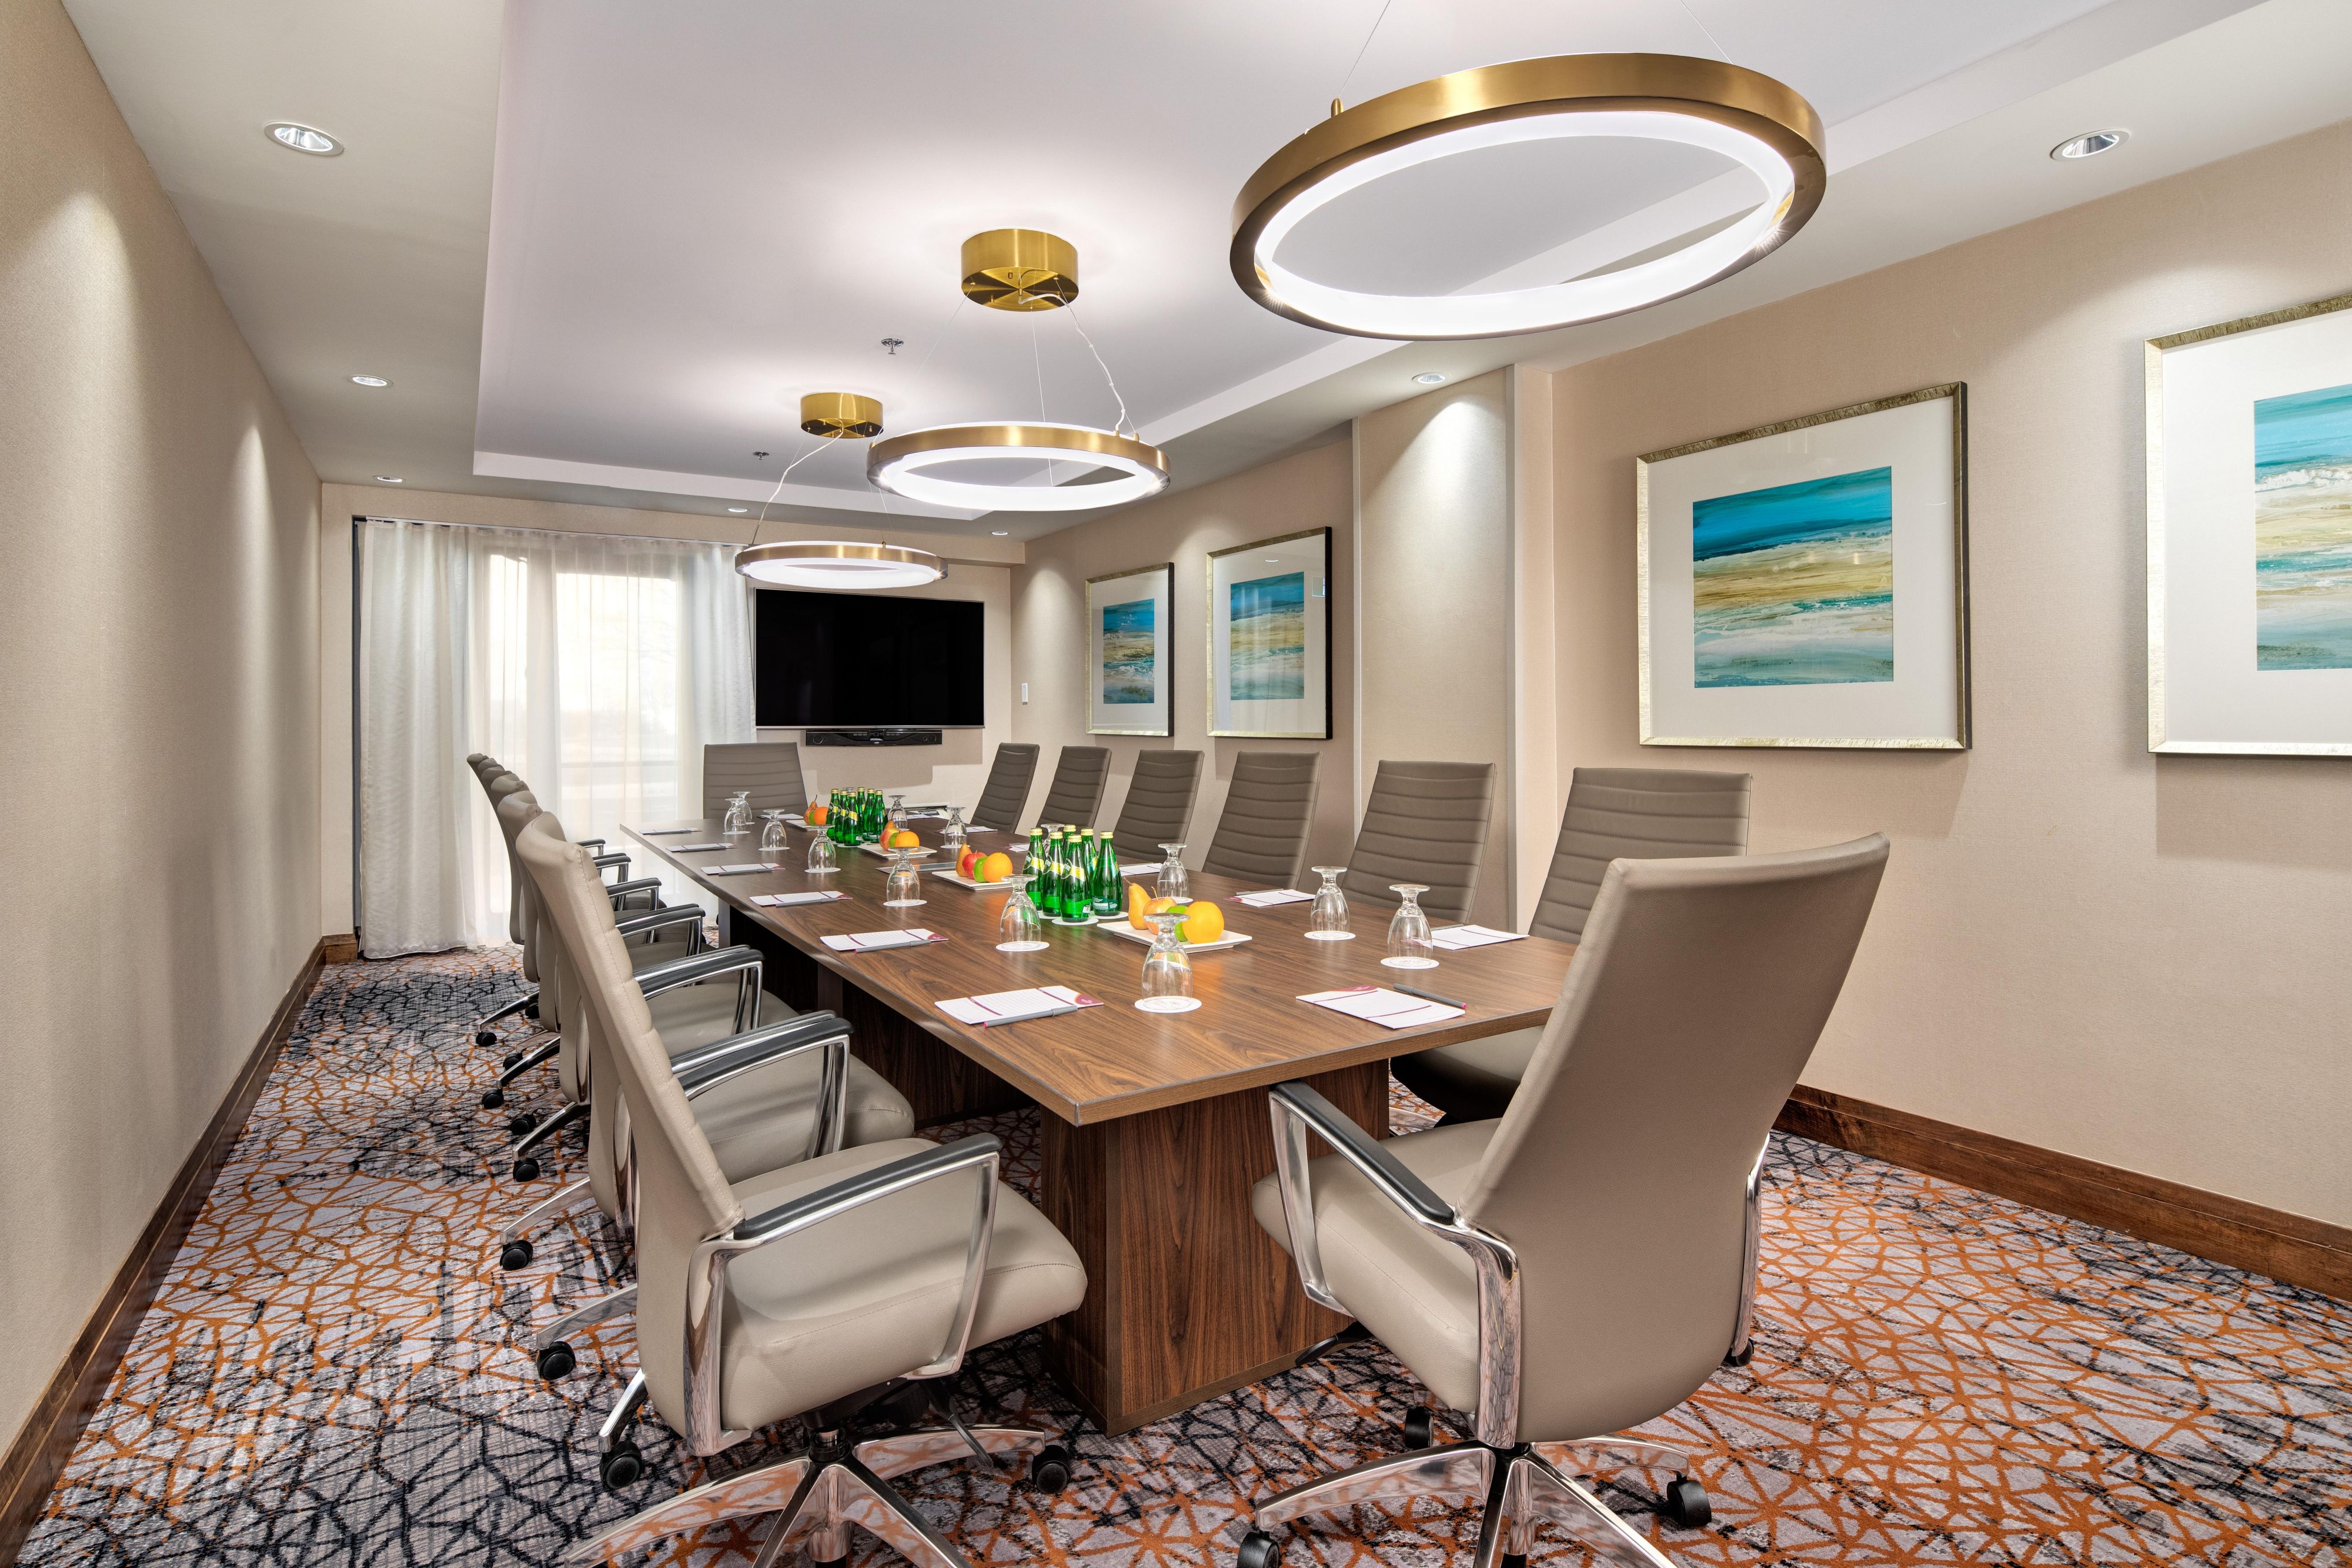 A fresh approach to meetings and events near Toronto or YYZ